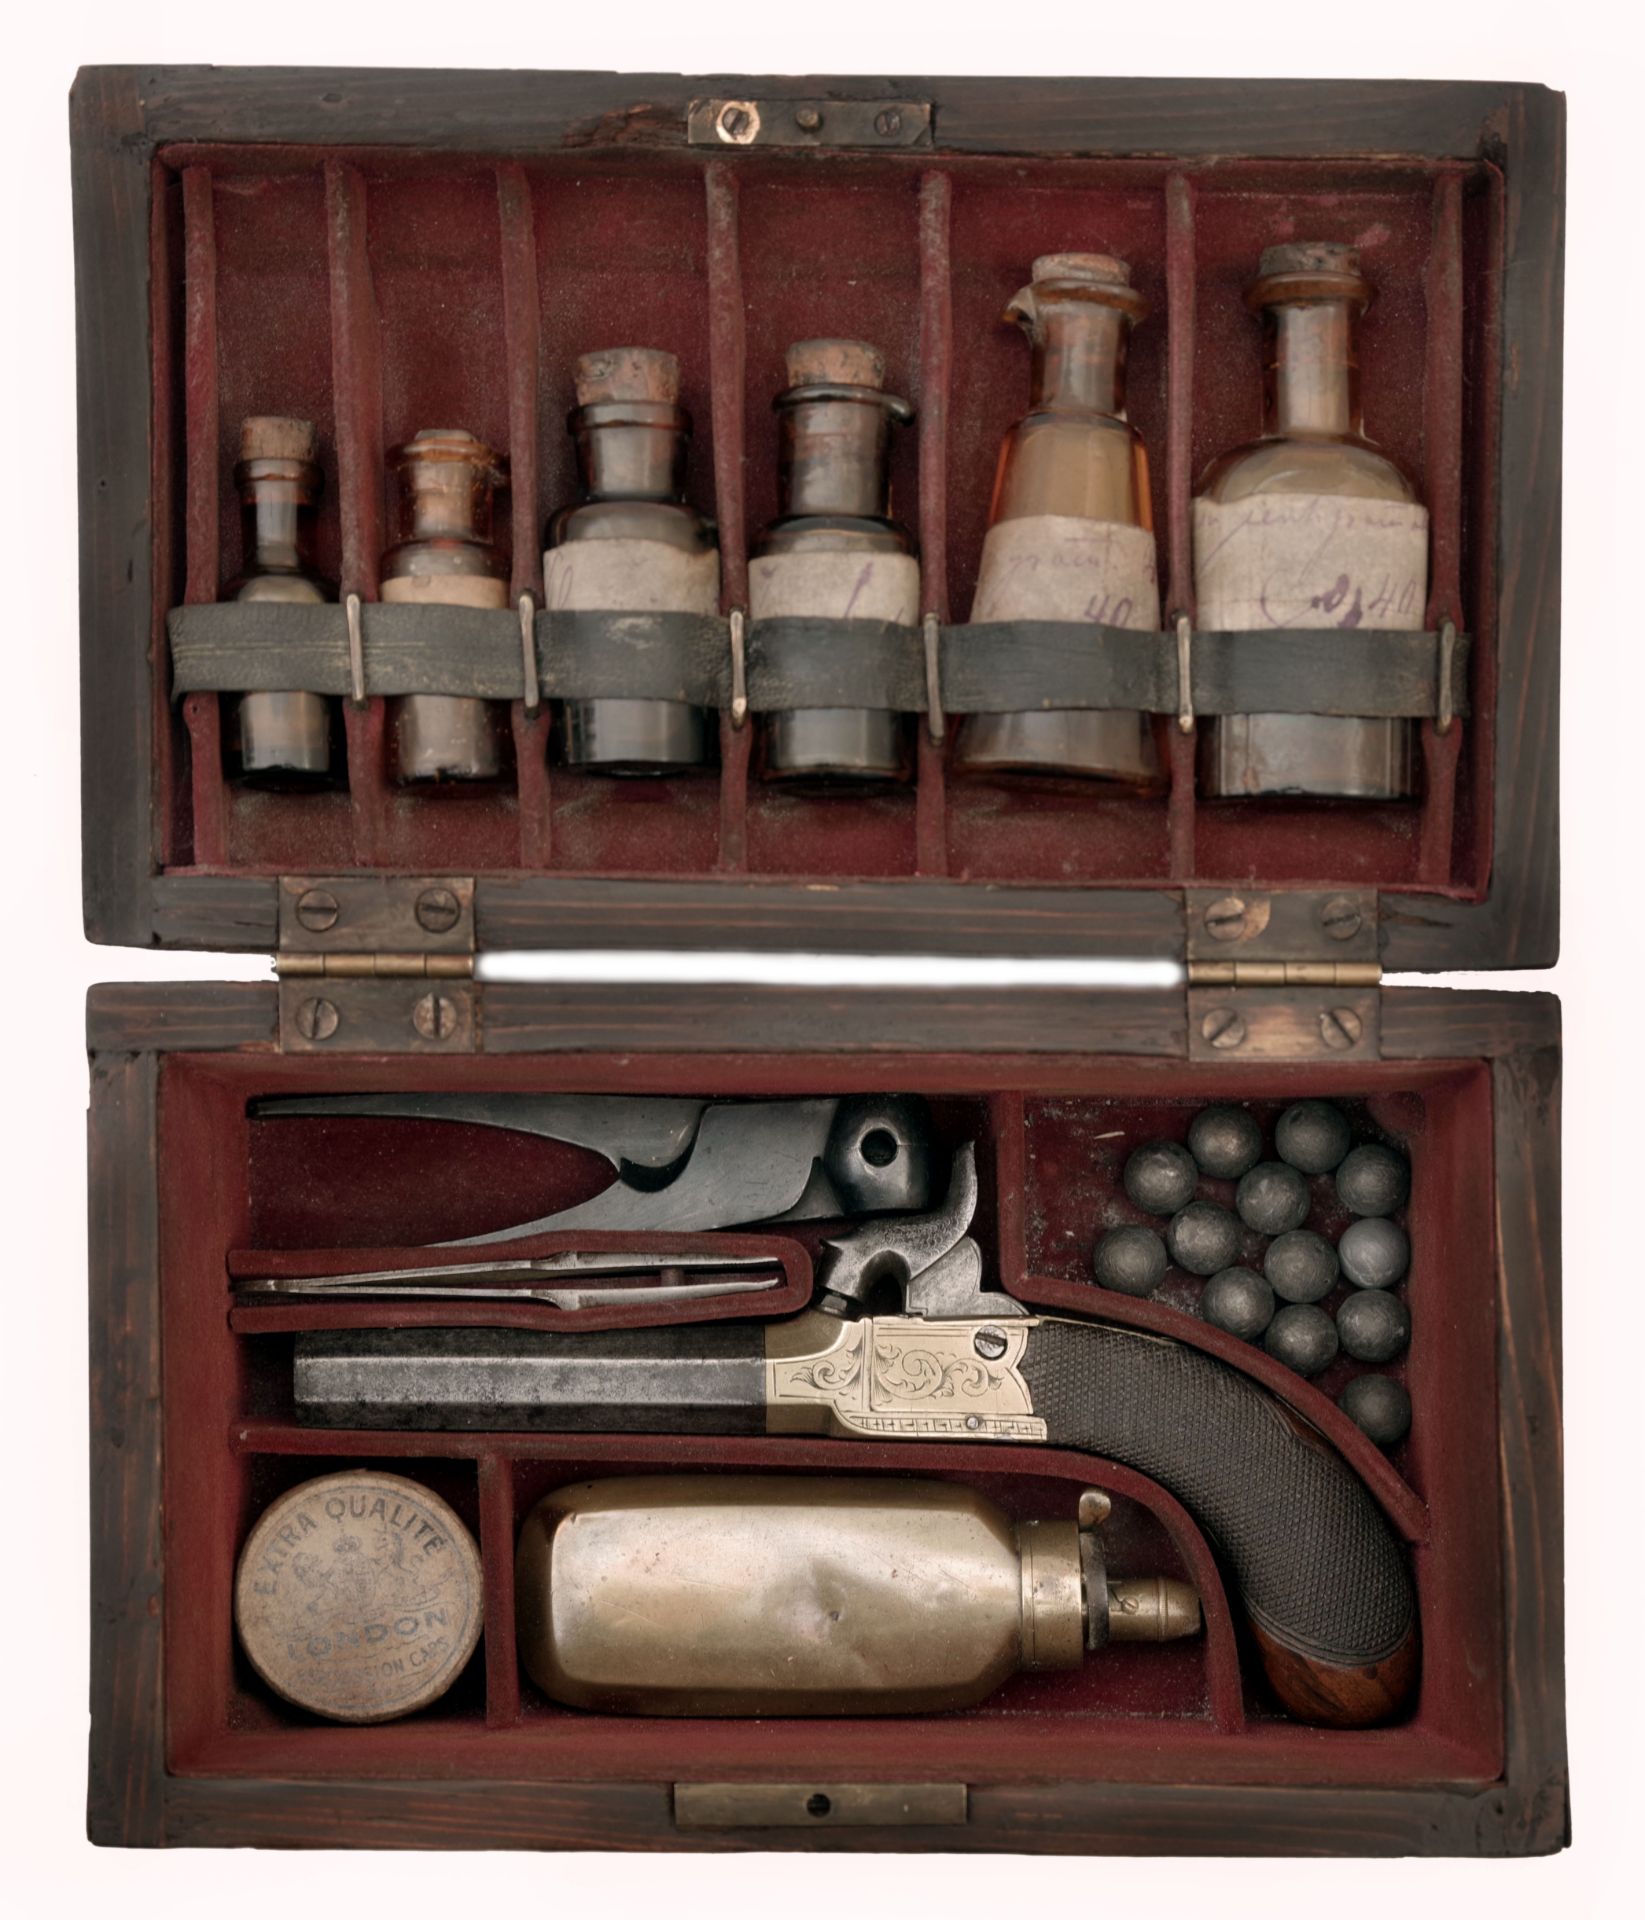 A Portable Scientific Instruments with Pocket Percussion Pistol - Image 11 of 12